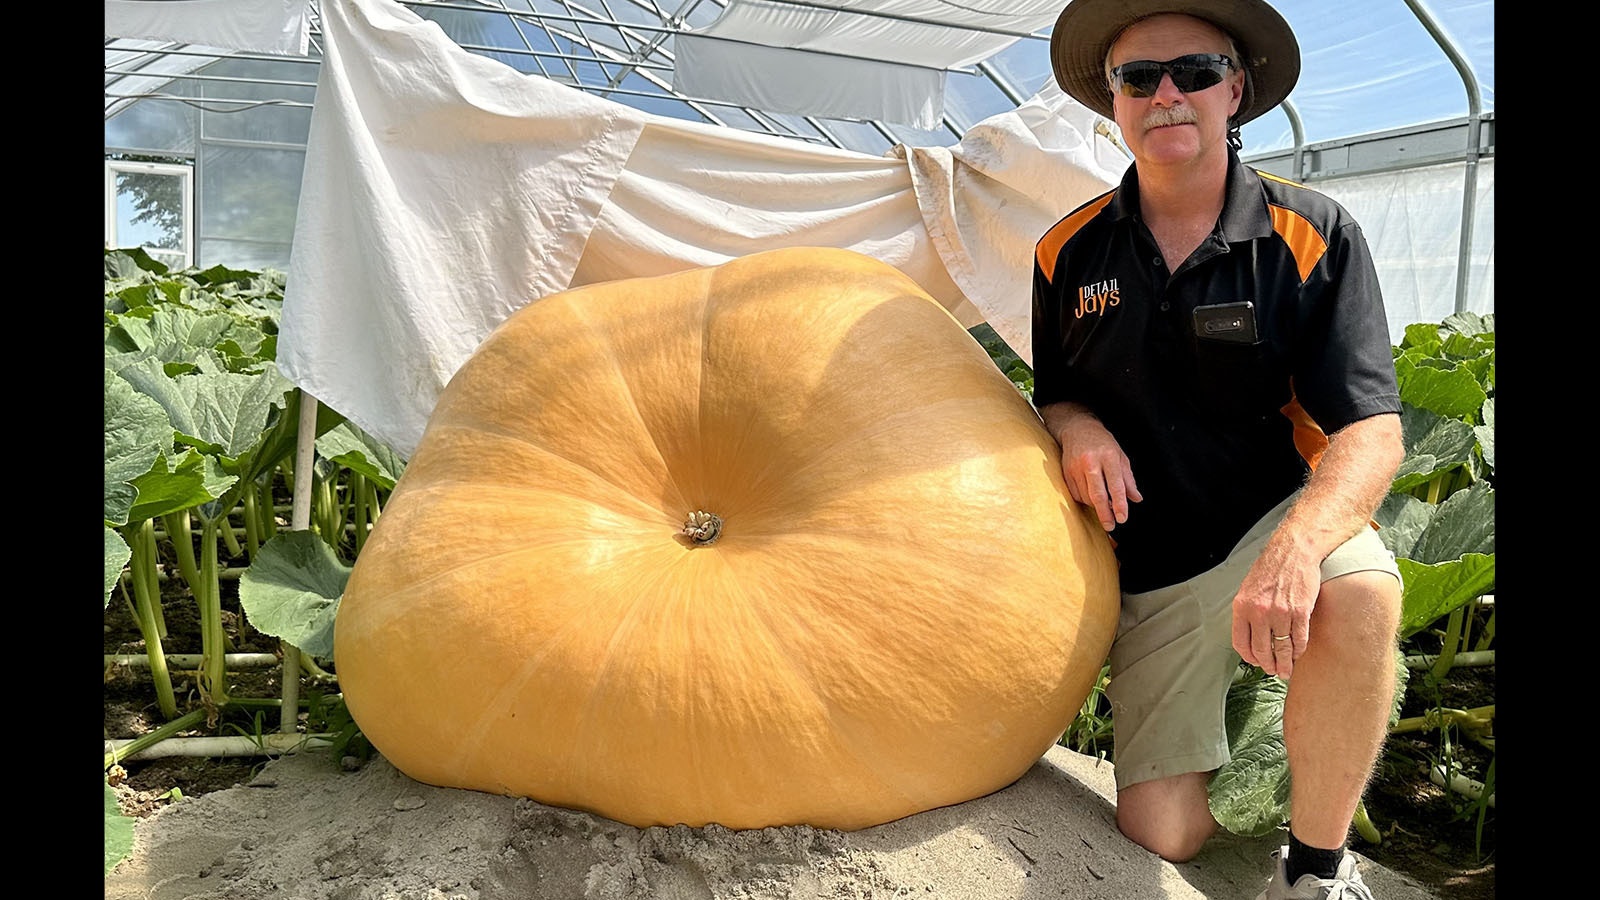 Richards kneels next to his giant pumpkin he's named "Marion Cunningham," on track to become the largest pumpkin he's ever grown. Both pumpkins are further along in their growth at this point on the calender than any others he's grown in the past.